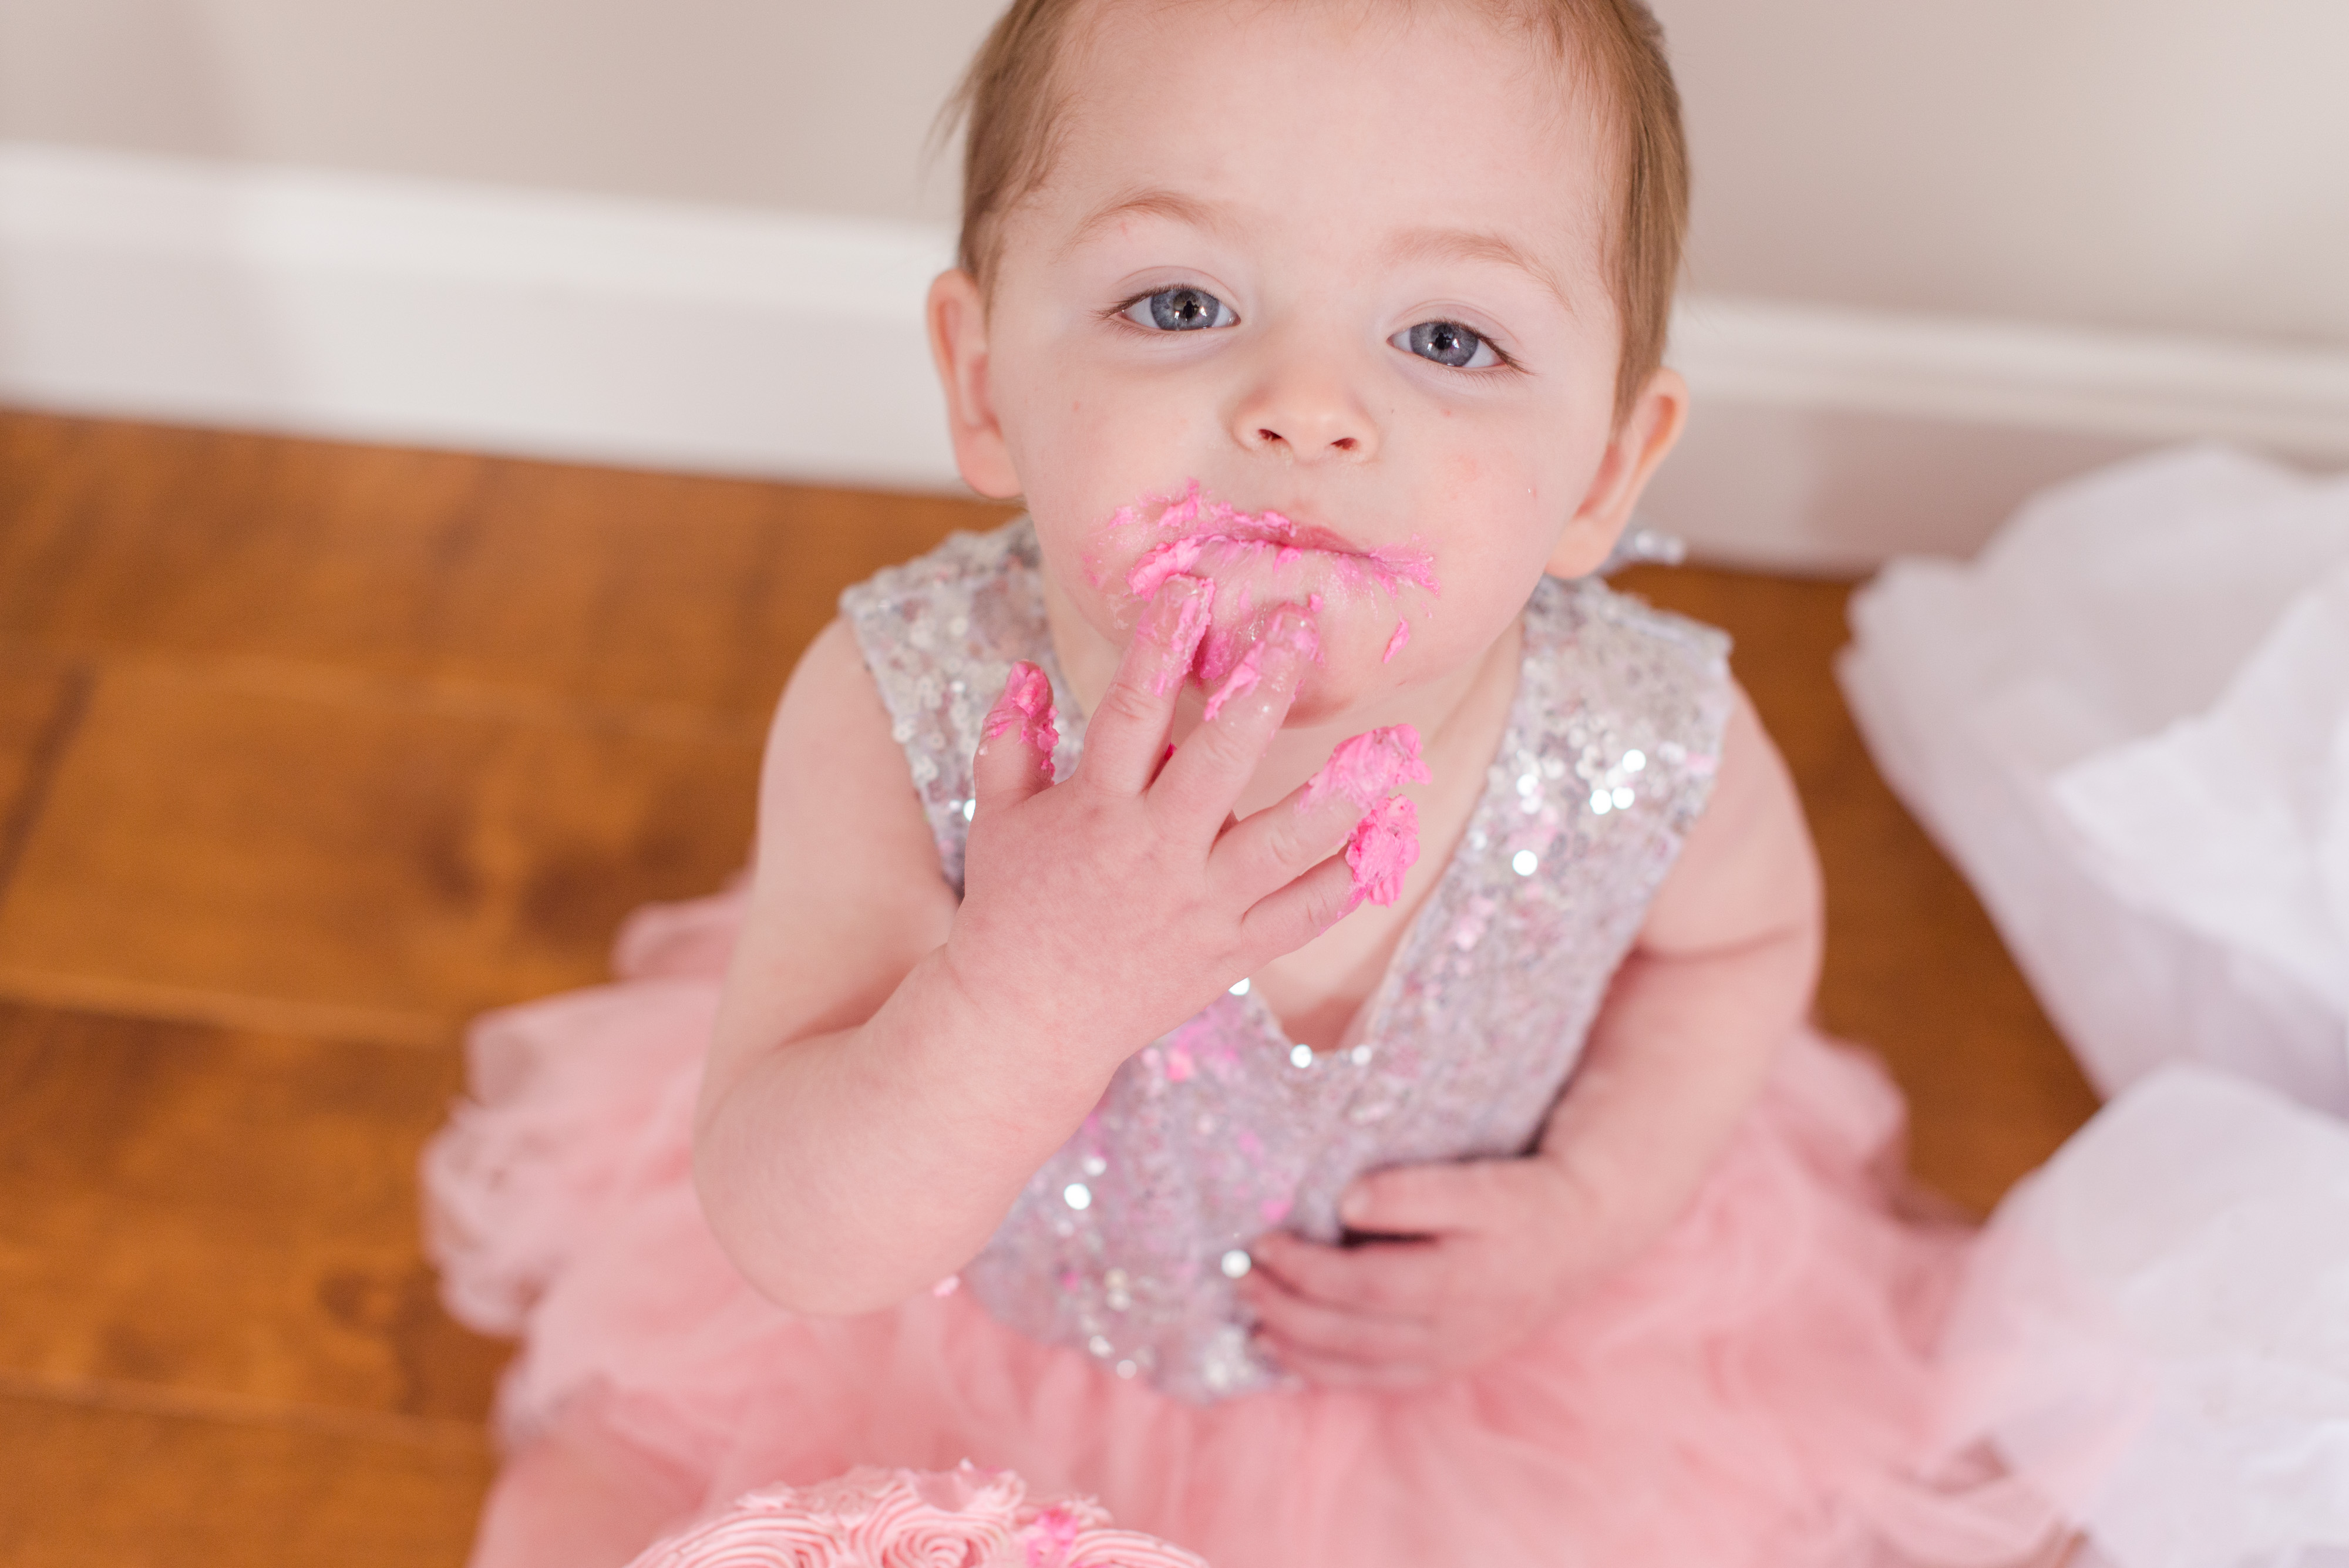 Tips on how to have a successful cake smash photo session by Linda Barry Photography. Click here to read more!